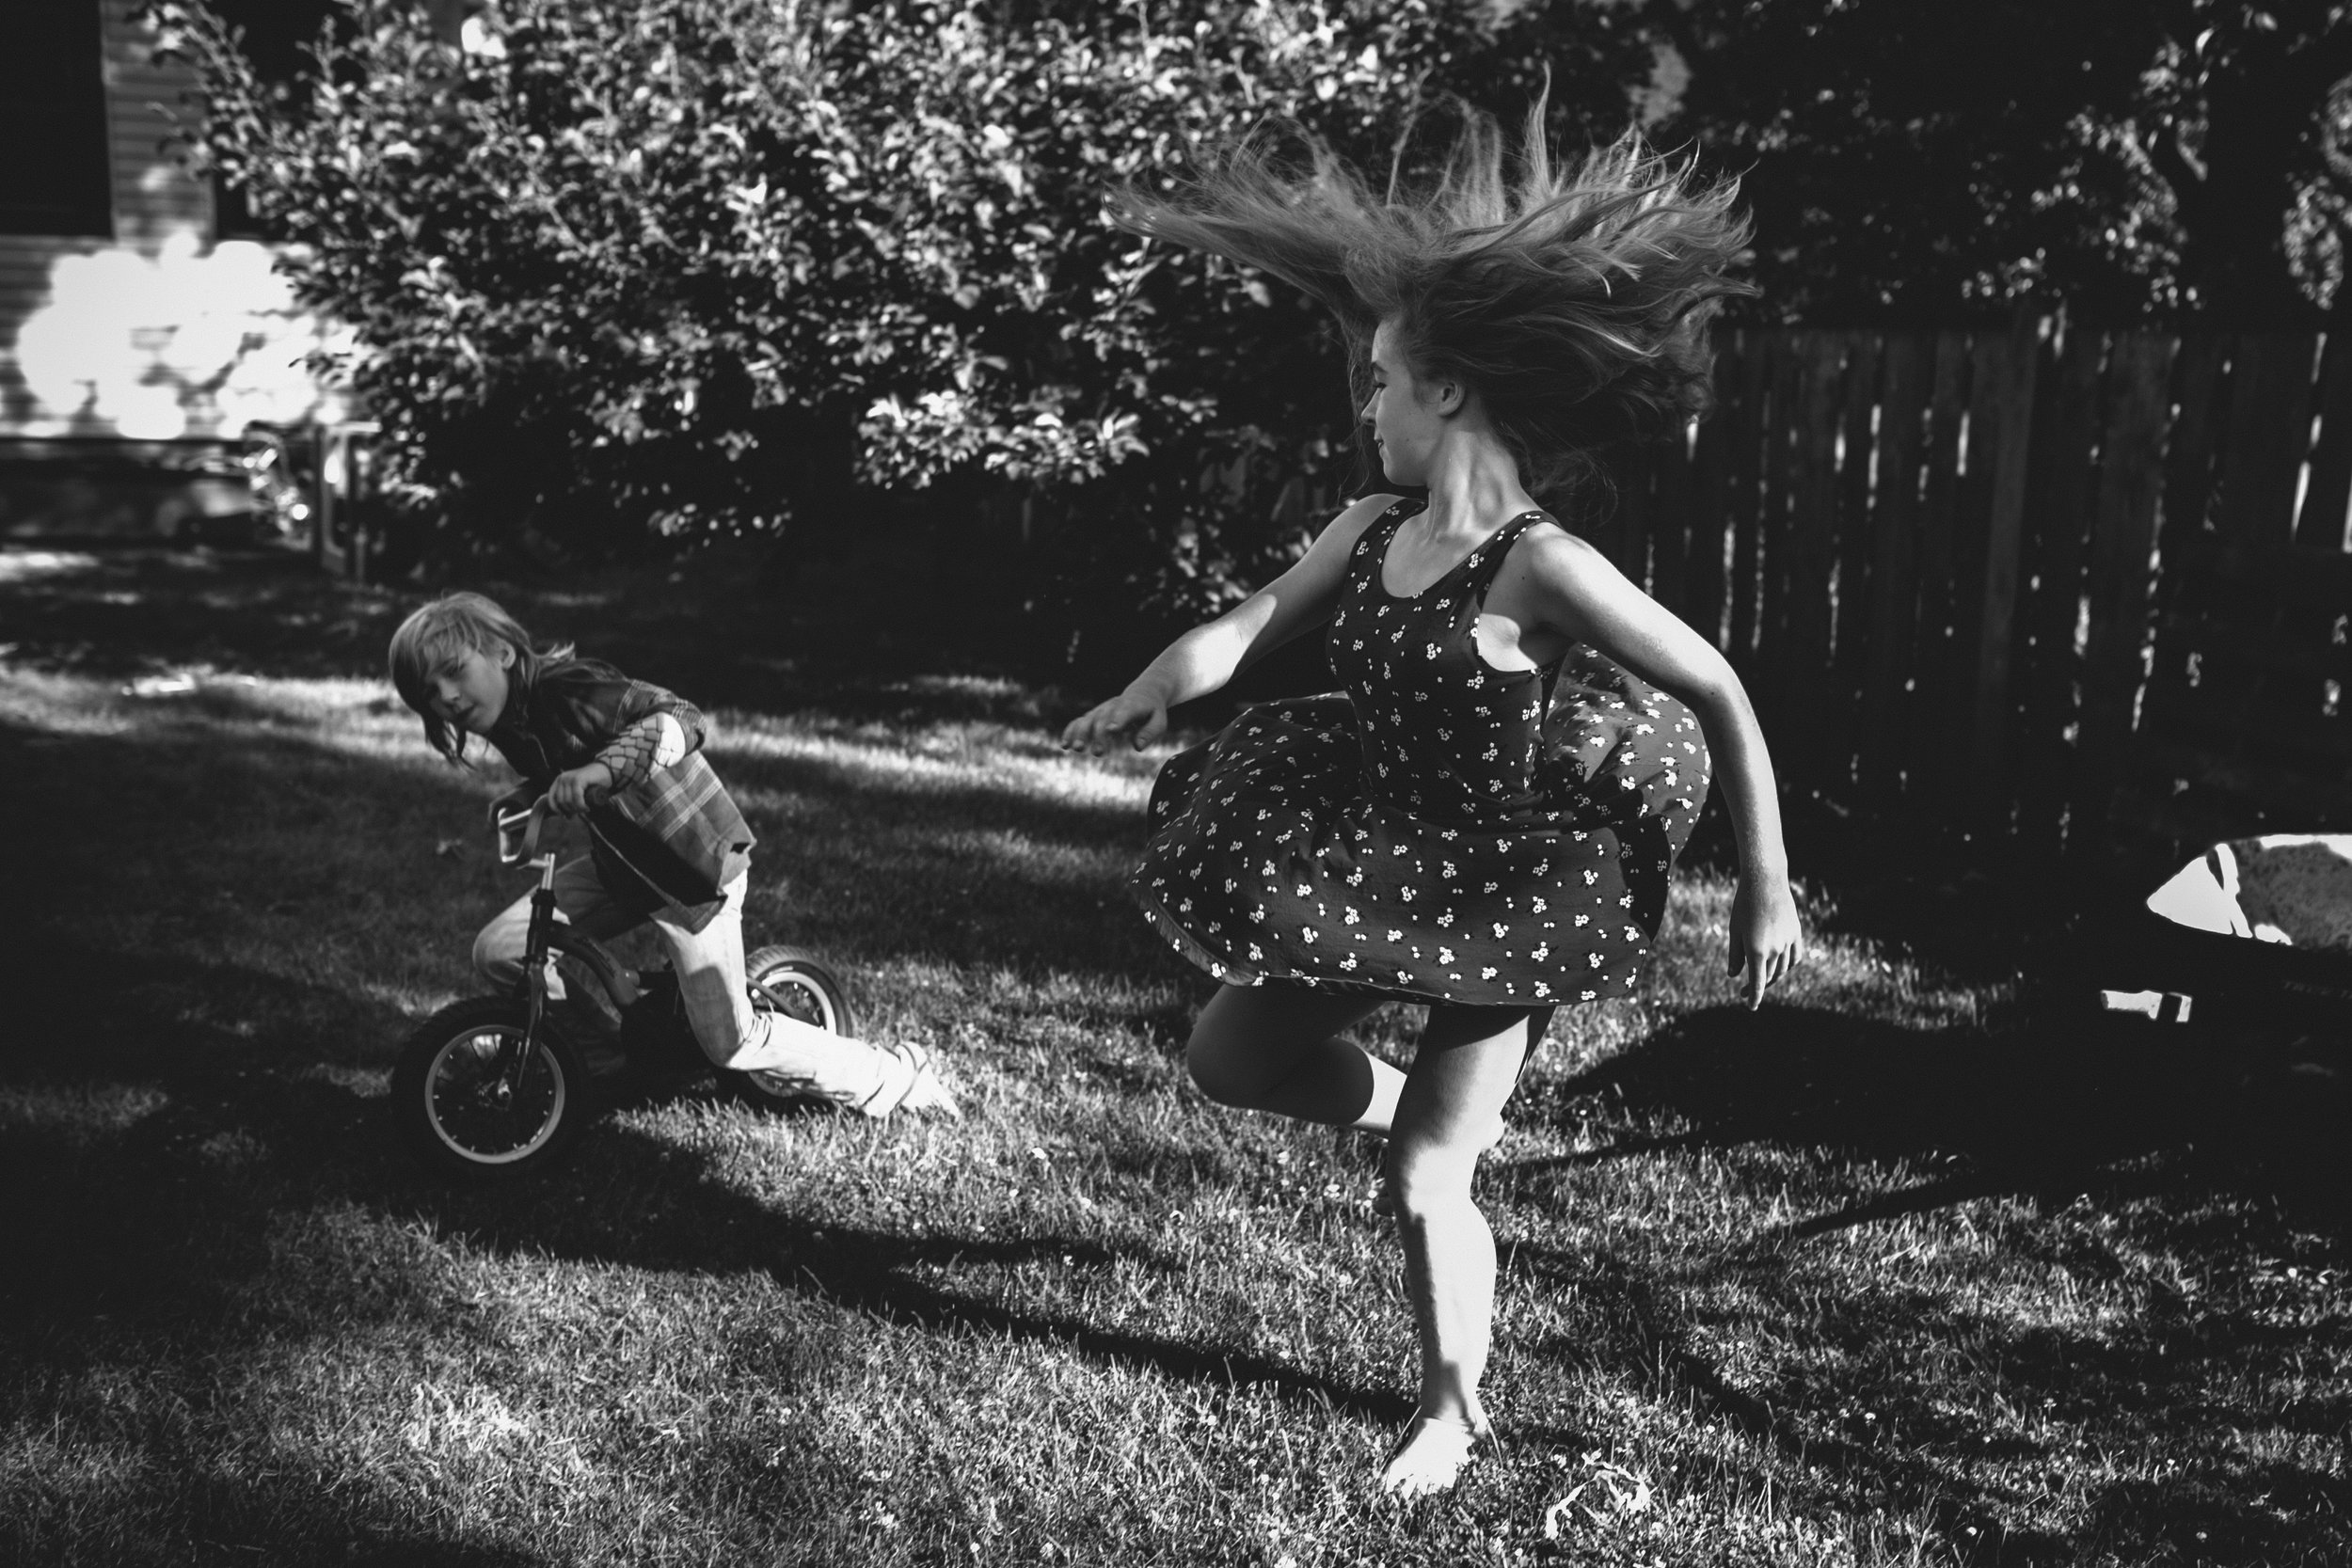 Girl spinning with hair flying while boy on a bike looks on from portrait of play photography session